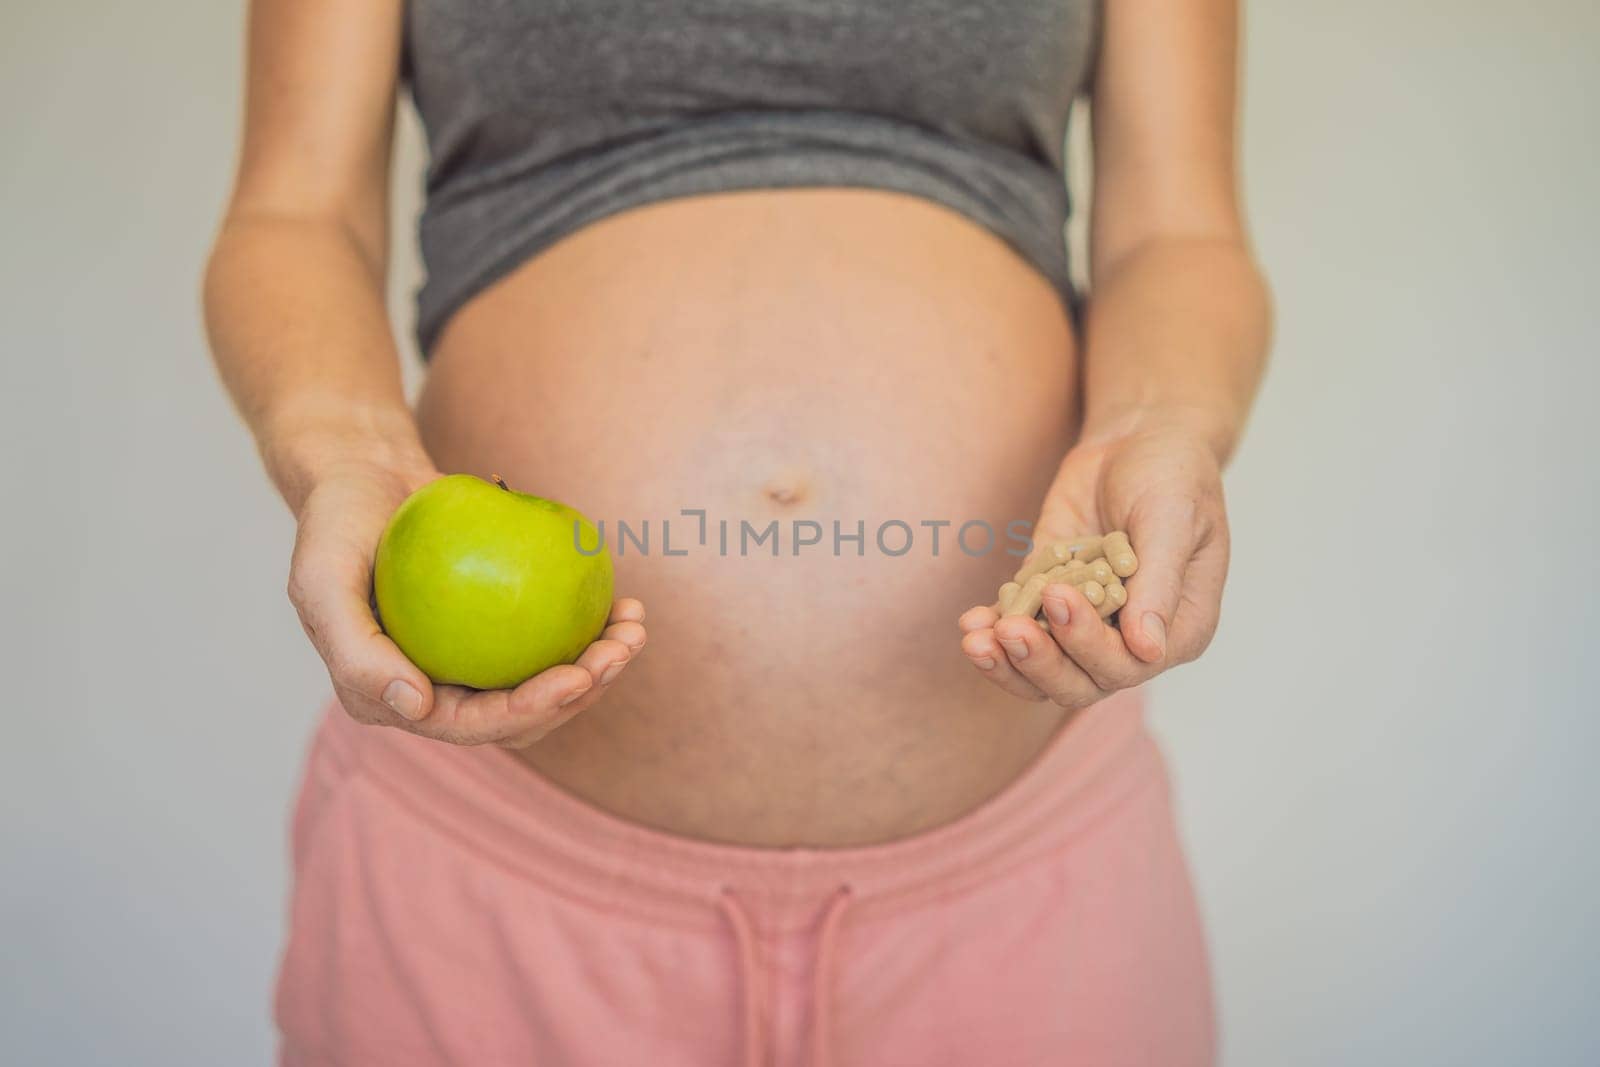 A thoughtful moment: A pregnant woman contemplates choosing between natural fruit or supplements for their nutritional needs, a choice between nature and science.